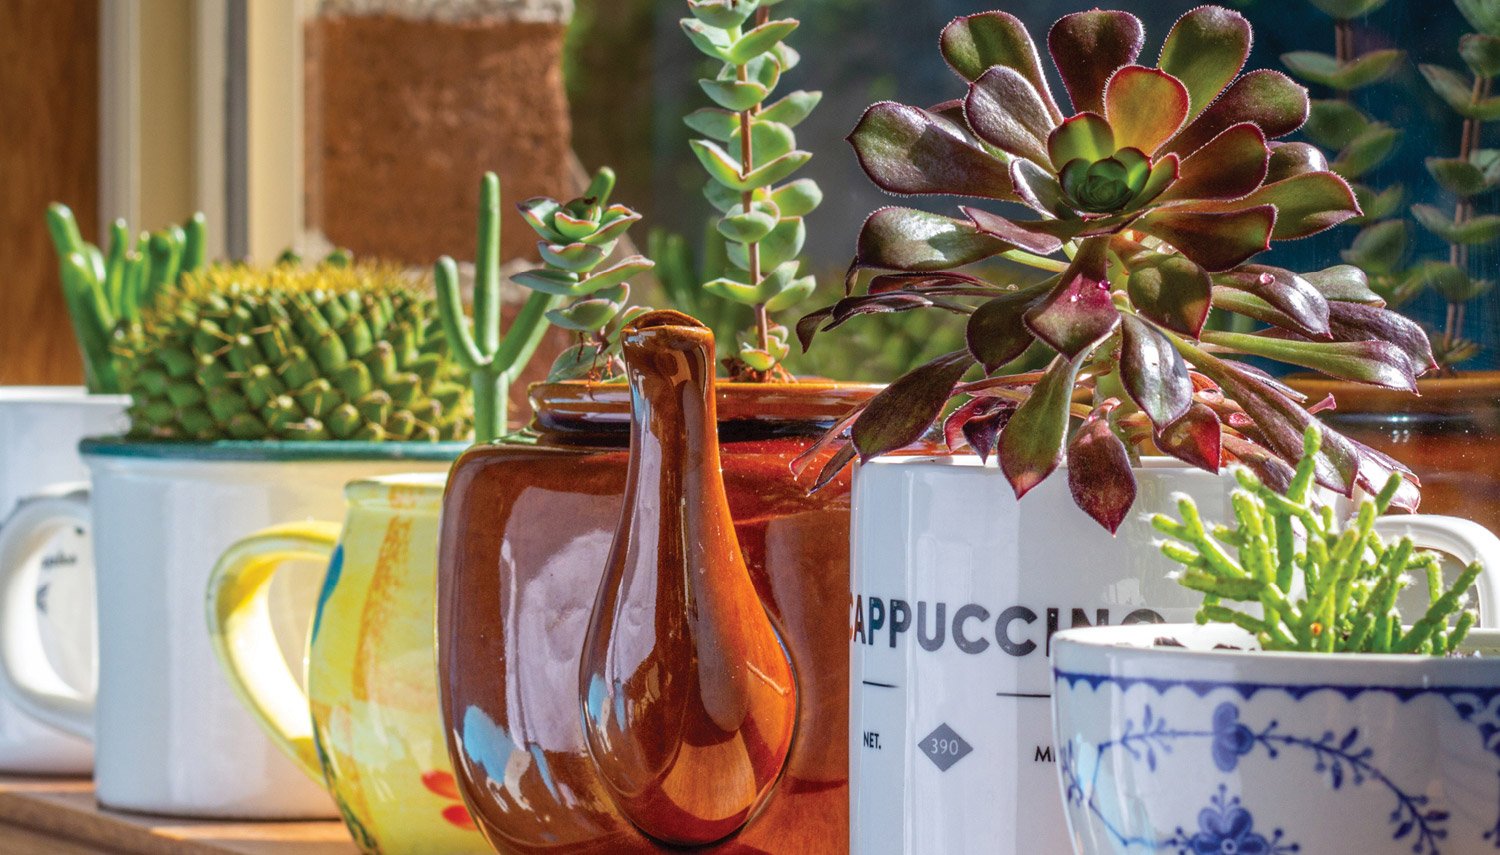 Small house plants and succulents lined up in a windowsill, each planted in a coffee mug or teapot used as an upcycled pot.